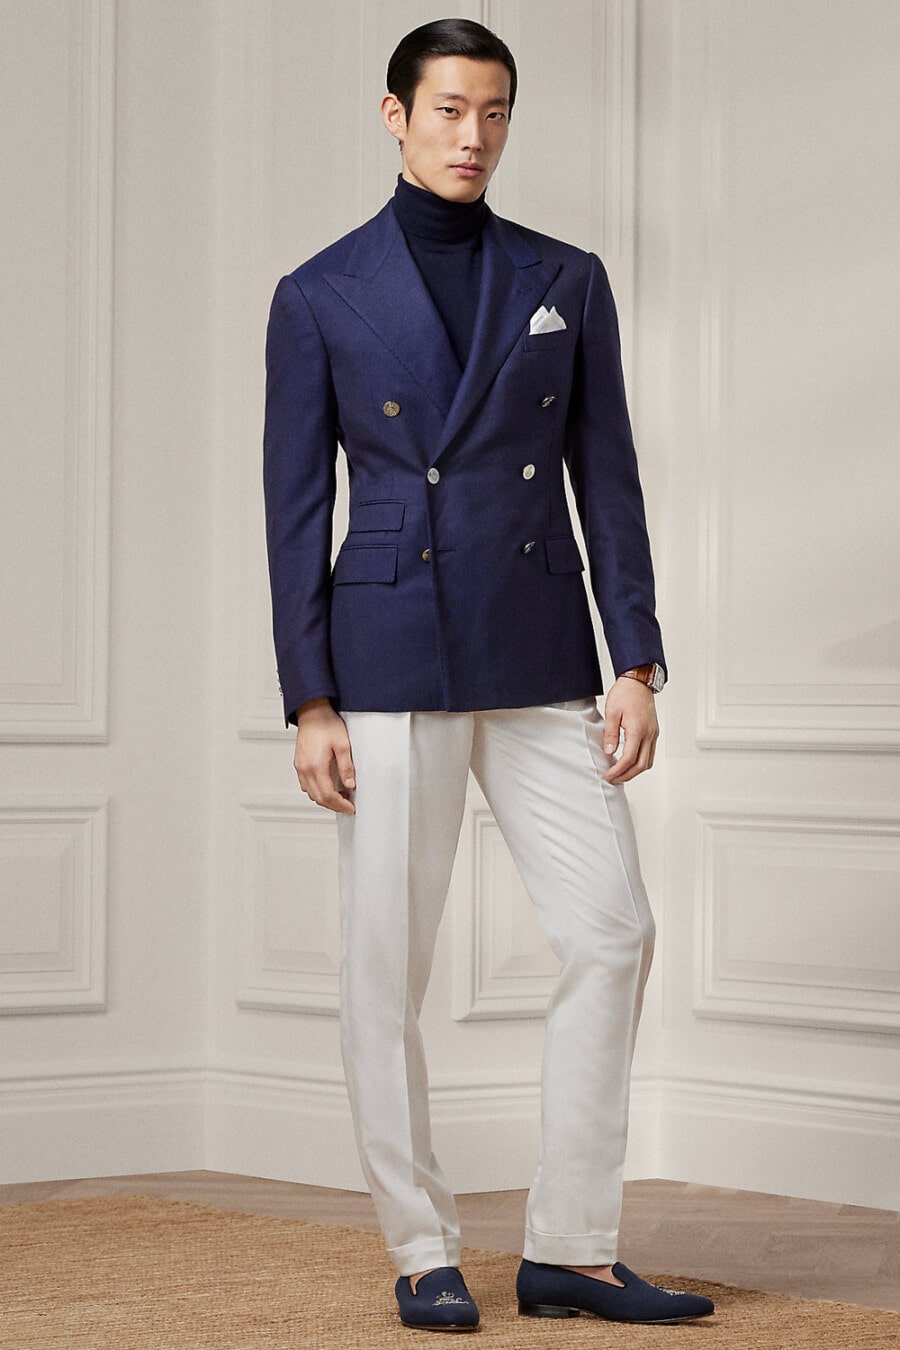 Men's double-breasted navy blazer, light grey tailored pants, navy turtleneck and navy dress slippers outfit